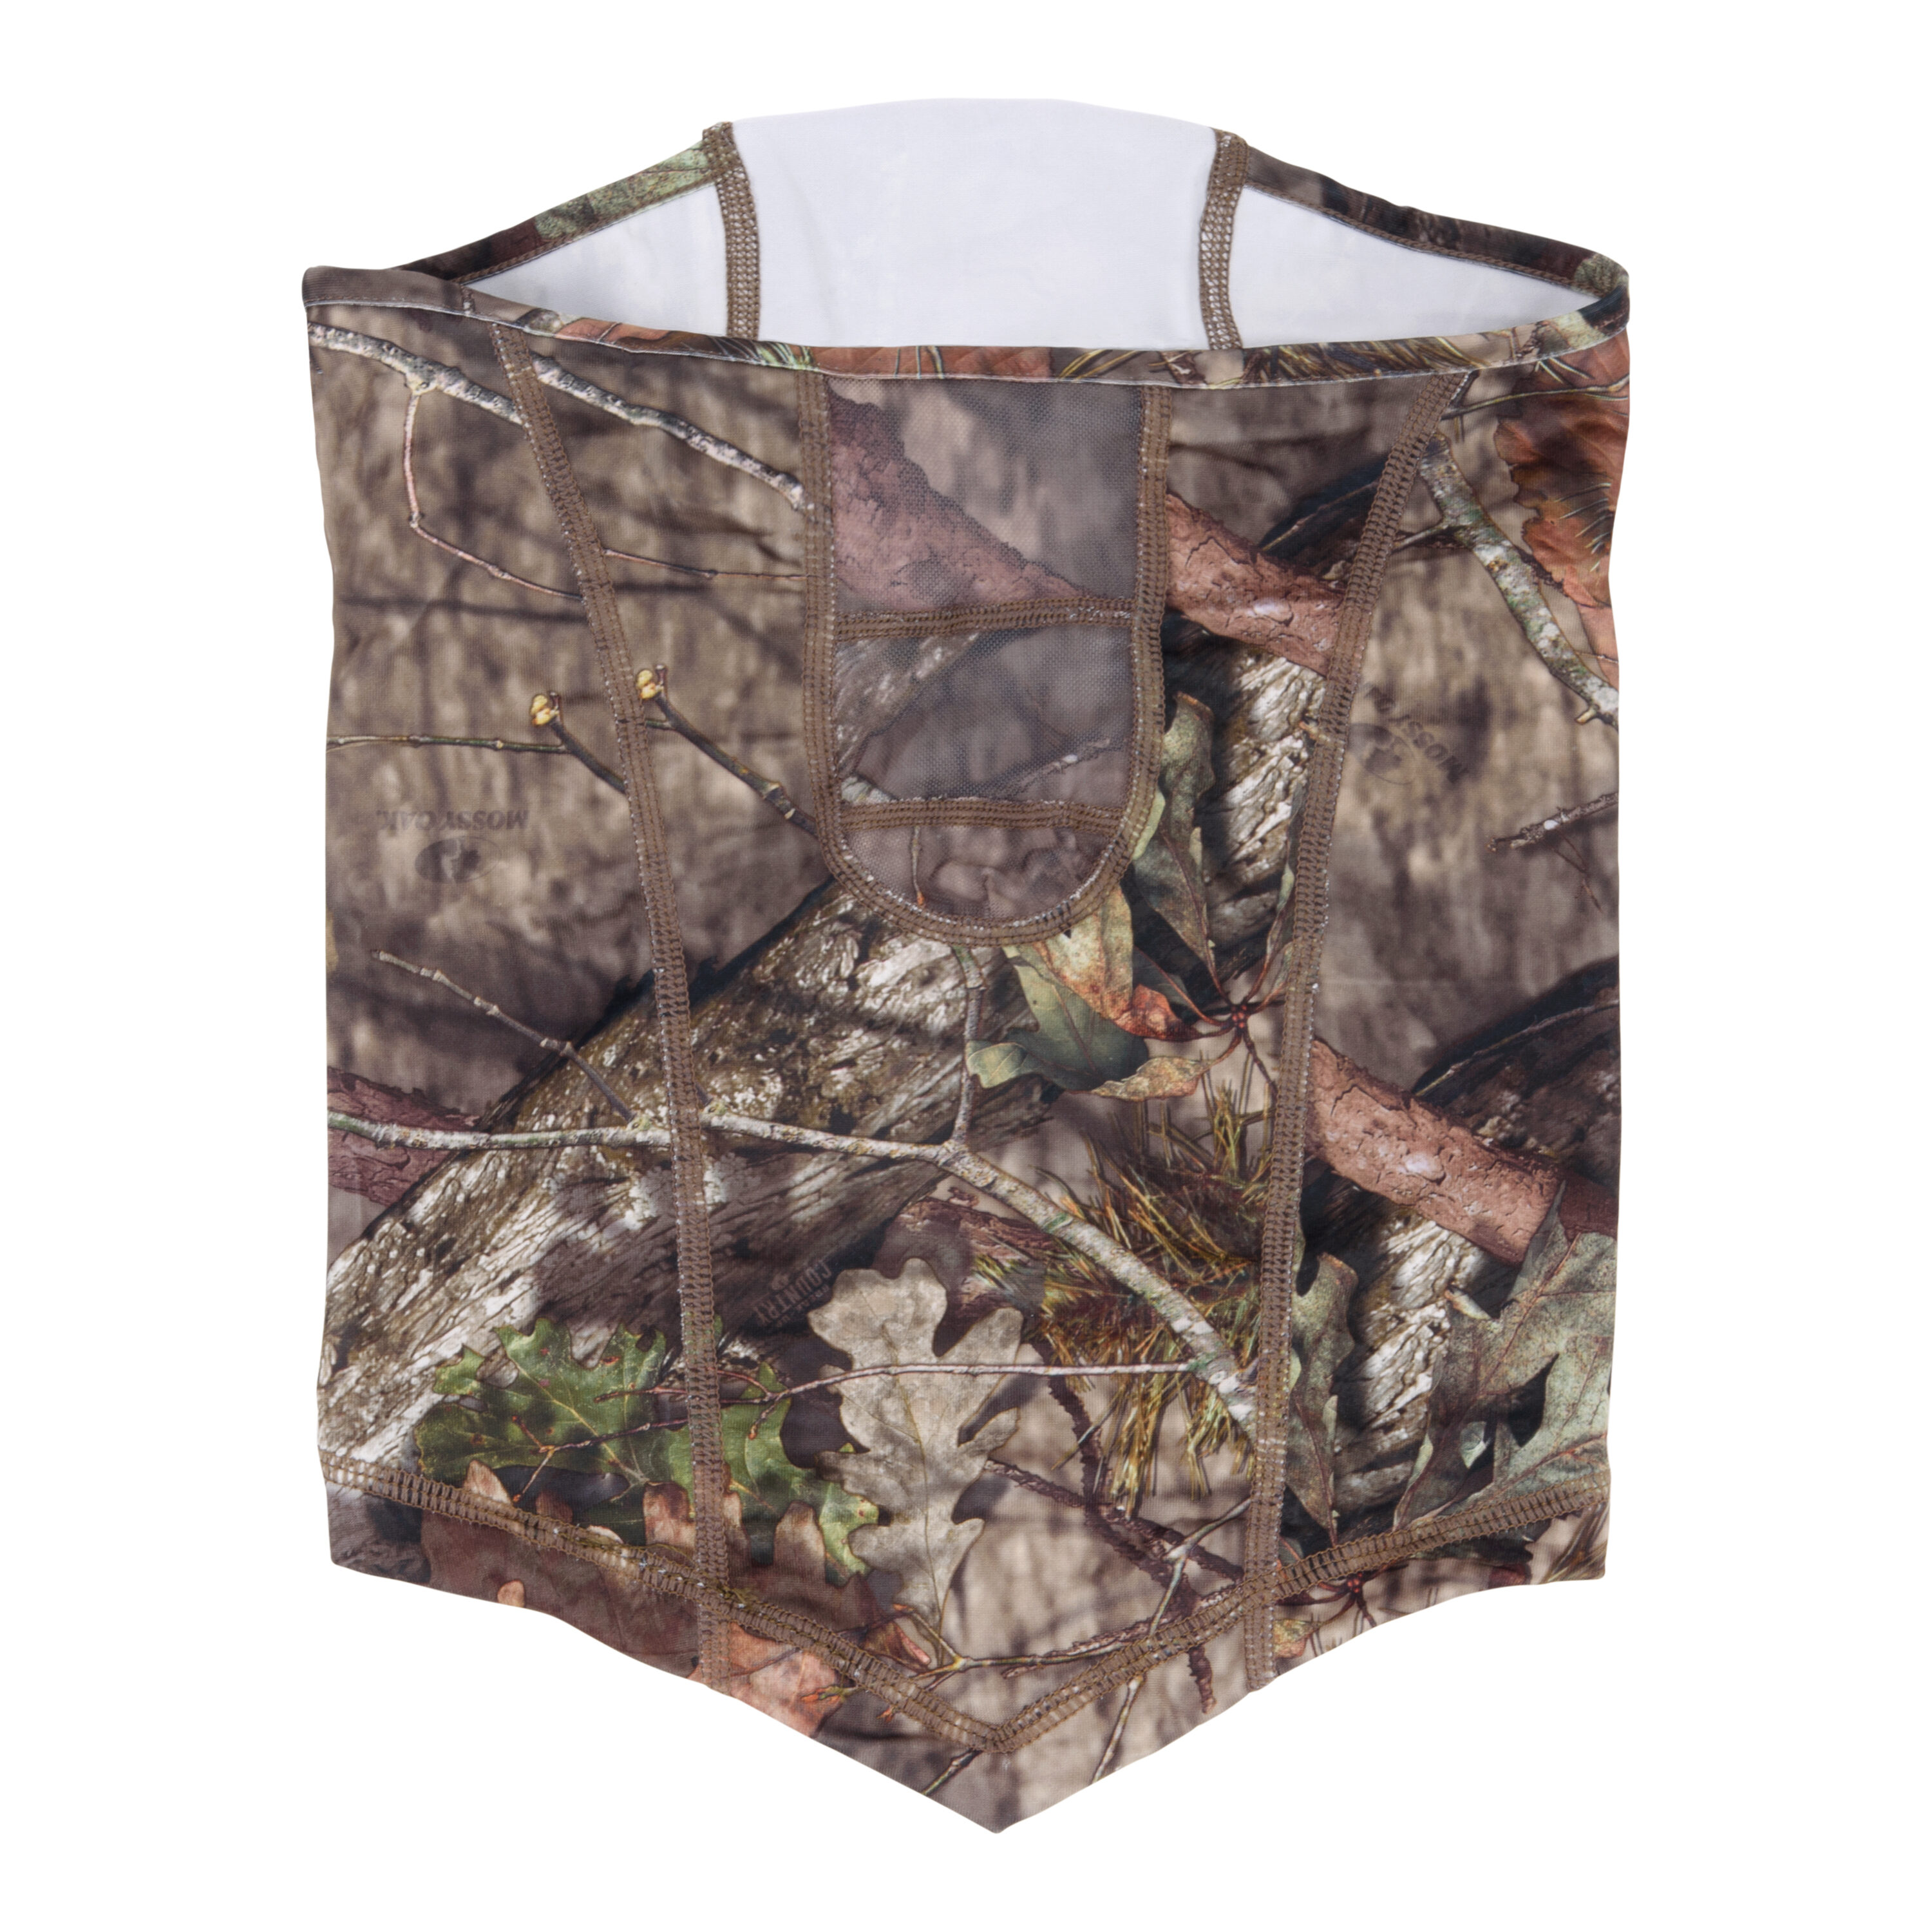 Allen Company Vanish Unisex Camo Balaclava - Hunting Face Cover - Ideal  Hunting Gear For Men And Women - Realtree Edge Camo 